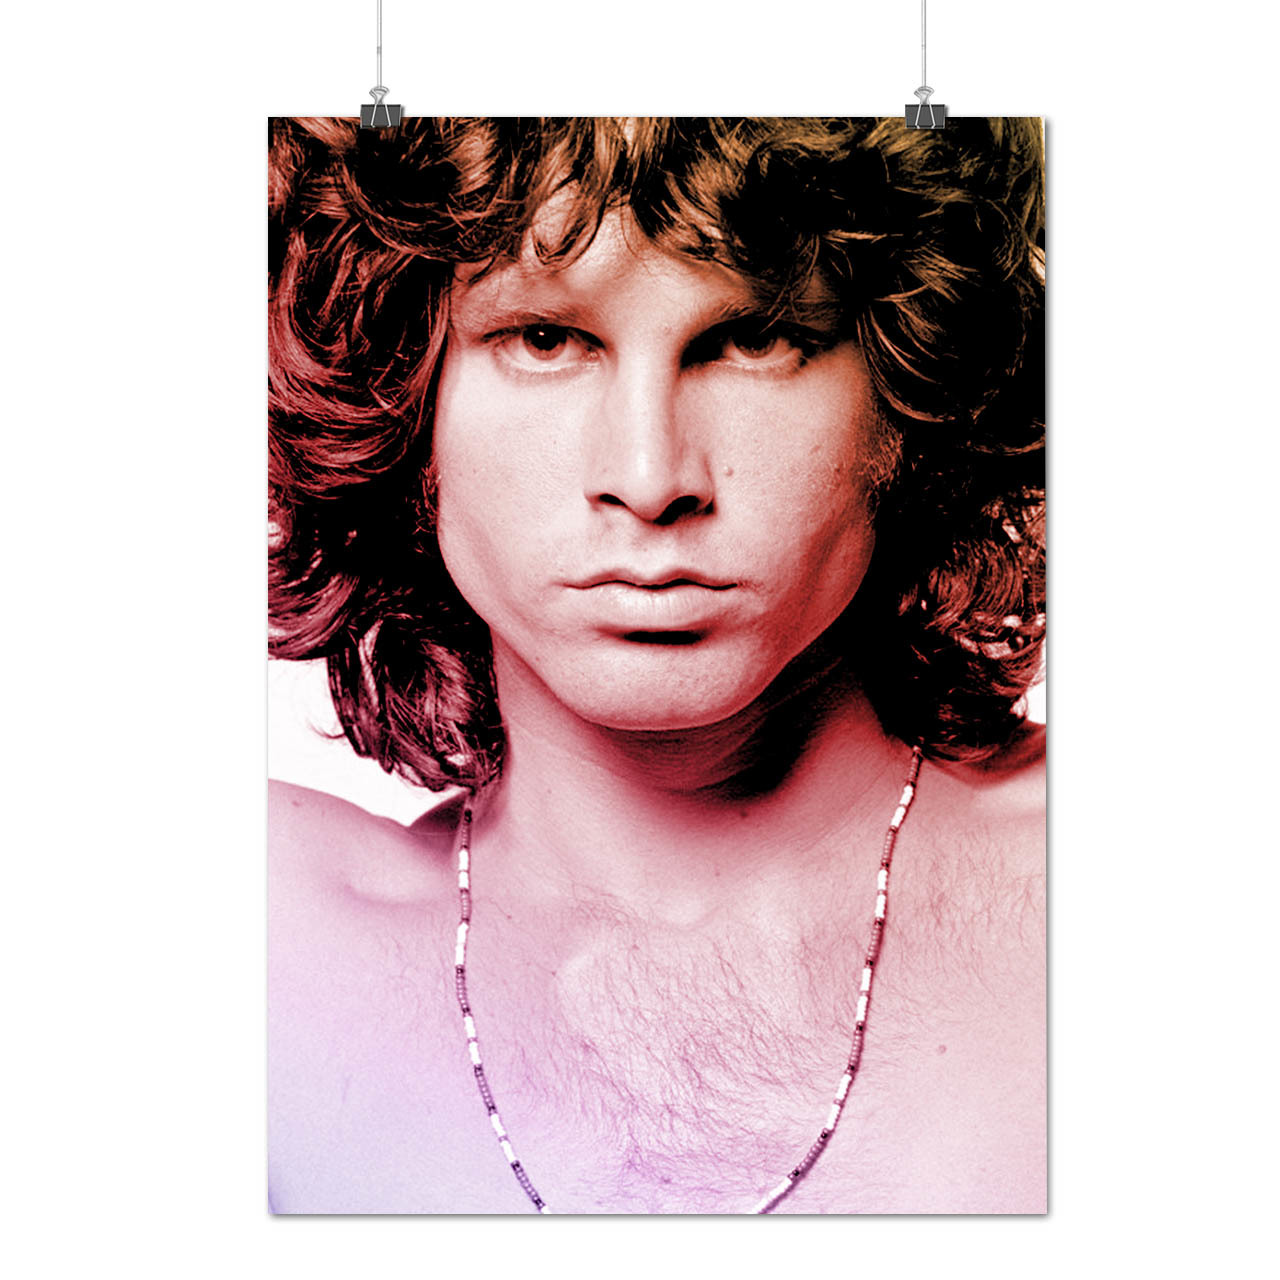 Primary image for Poet Singer Jim Morrison Matte/Glossy Poster A0 A1 A2 A3 A4 | Wellcoda